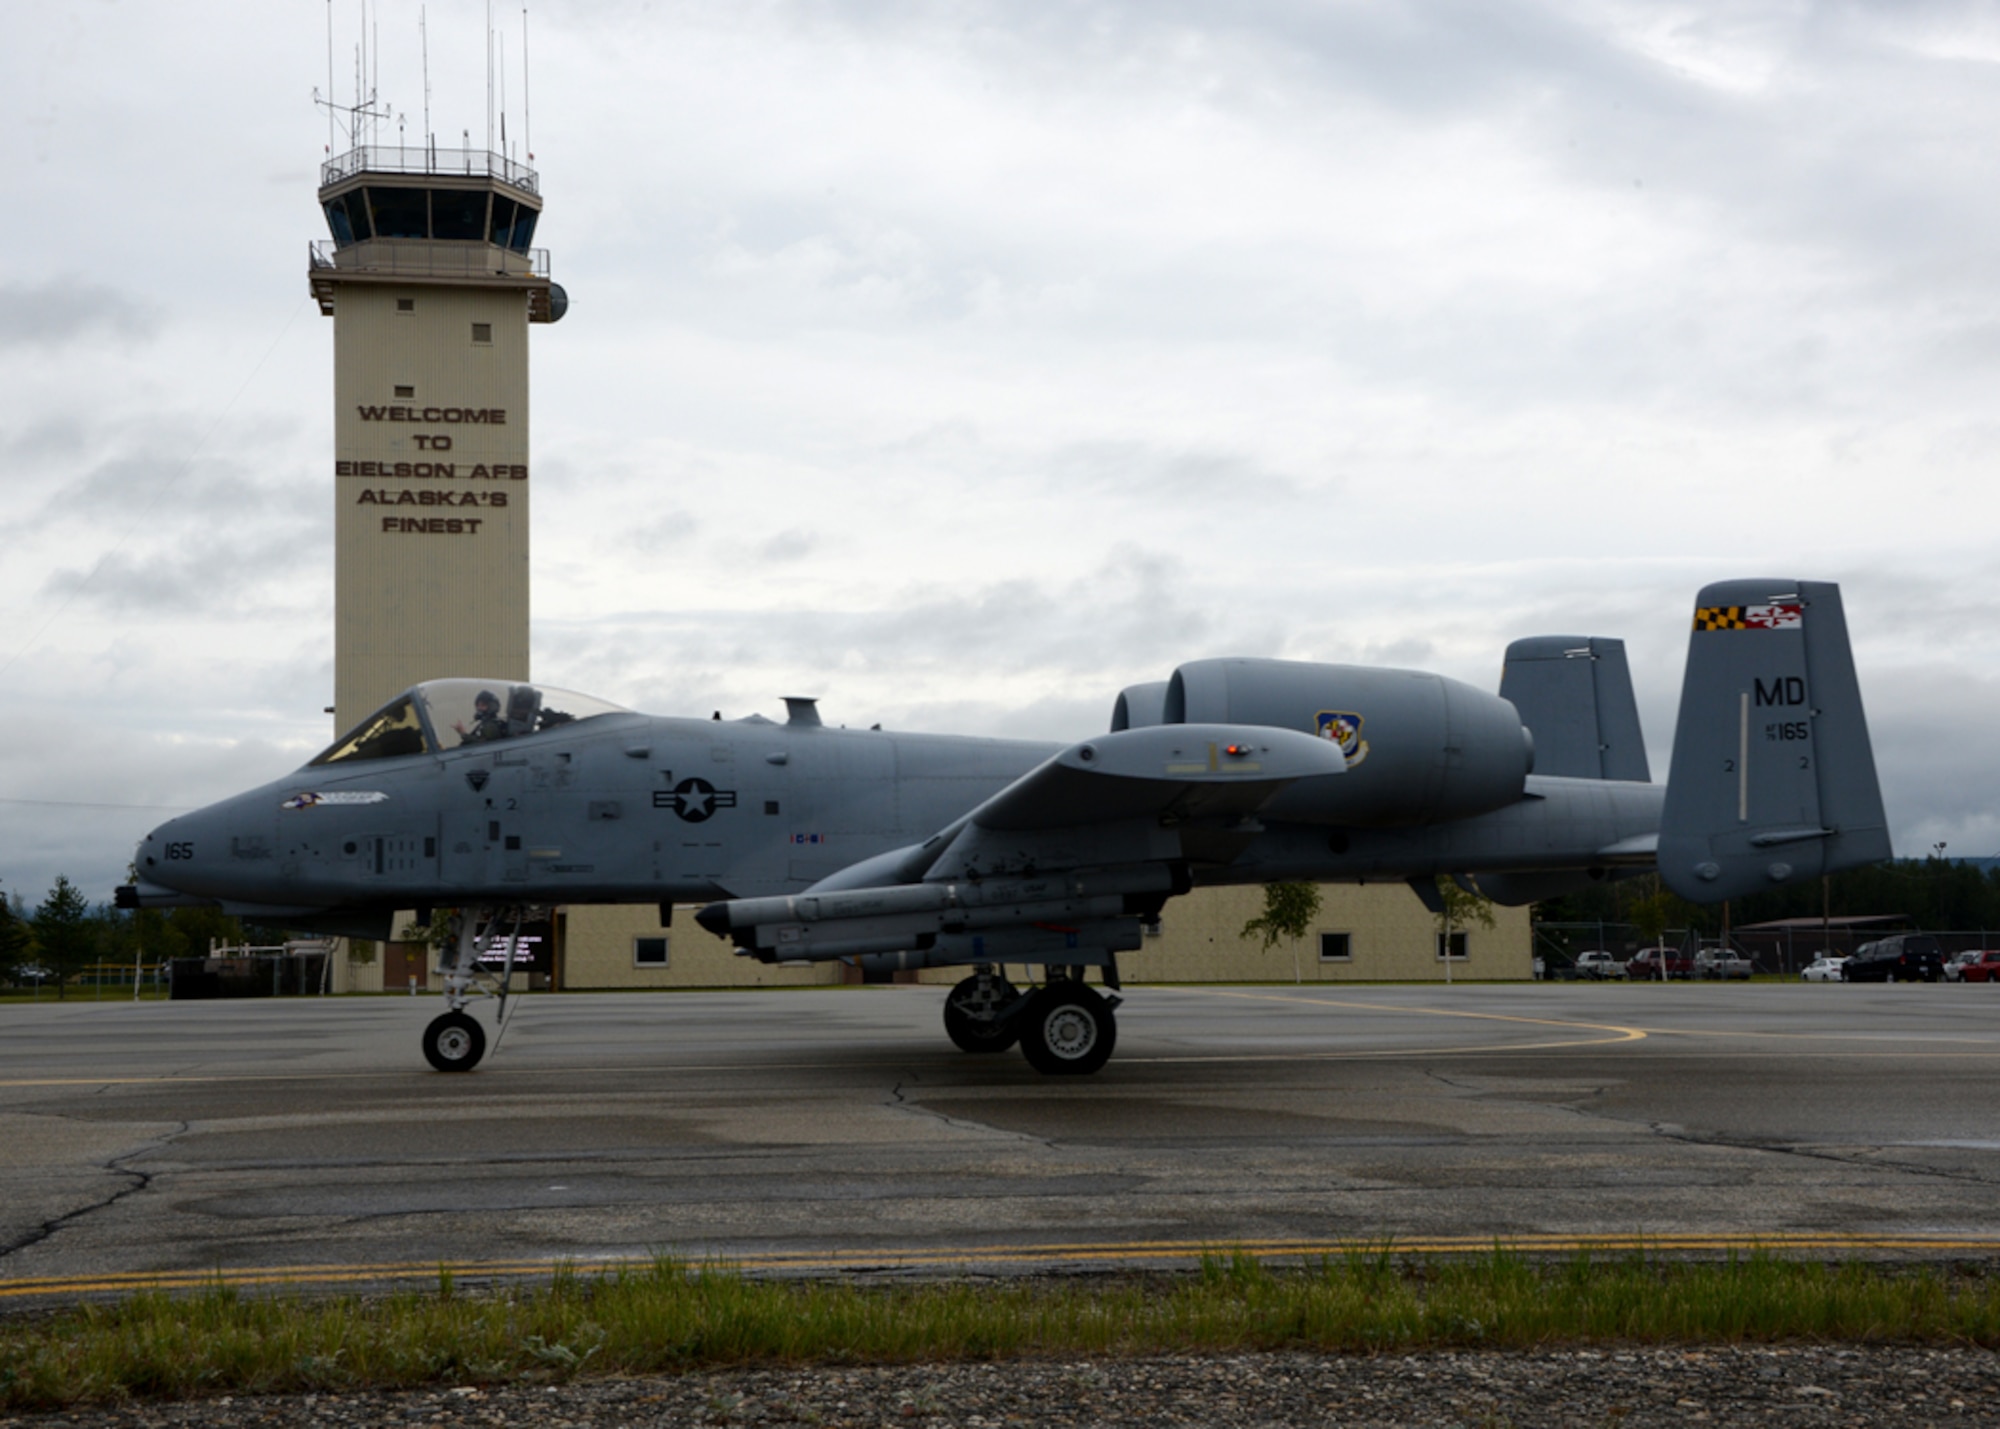 A pilot from the 104th Fighter Squadron, Warfield Air National Guard Base, Baltimore, Md. taxis past the observation tower overlooking the airfield at Eielson Air Force Base, Ak during Exercise Red Flag - Alaska 14-3. Exercise Red Flag is a 10 day exercise that is a series of Pacific Air Forces commander-directed field training exercises for U.S. forces, provides joint offensive counter-air, interdiction, close air support, and large force employment training in a simulated combat environment. (Air National Guard photo by Tech. Sgt. Christopher Schepers/RELEASED)